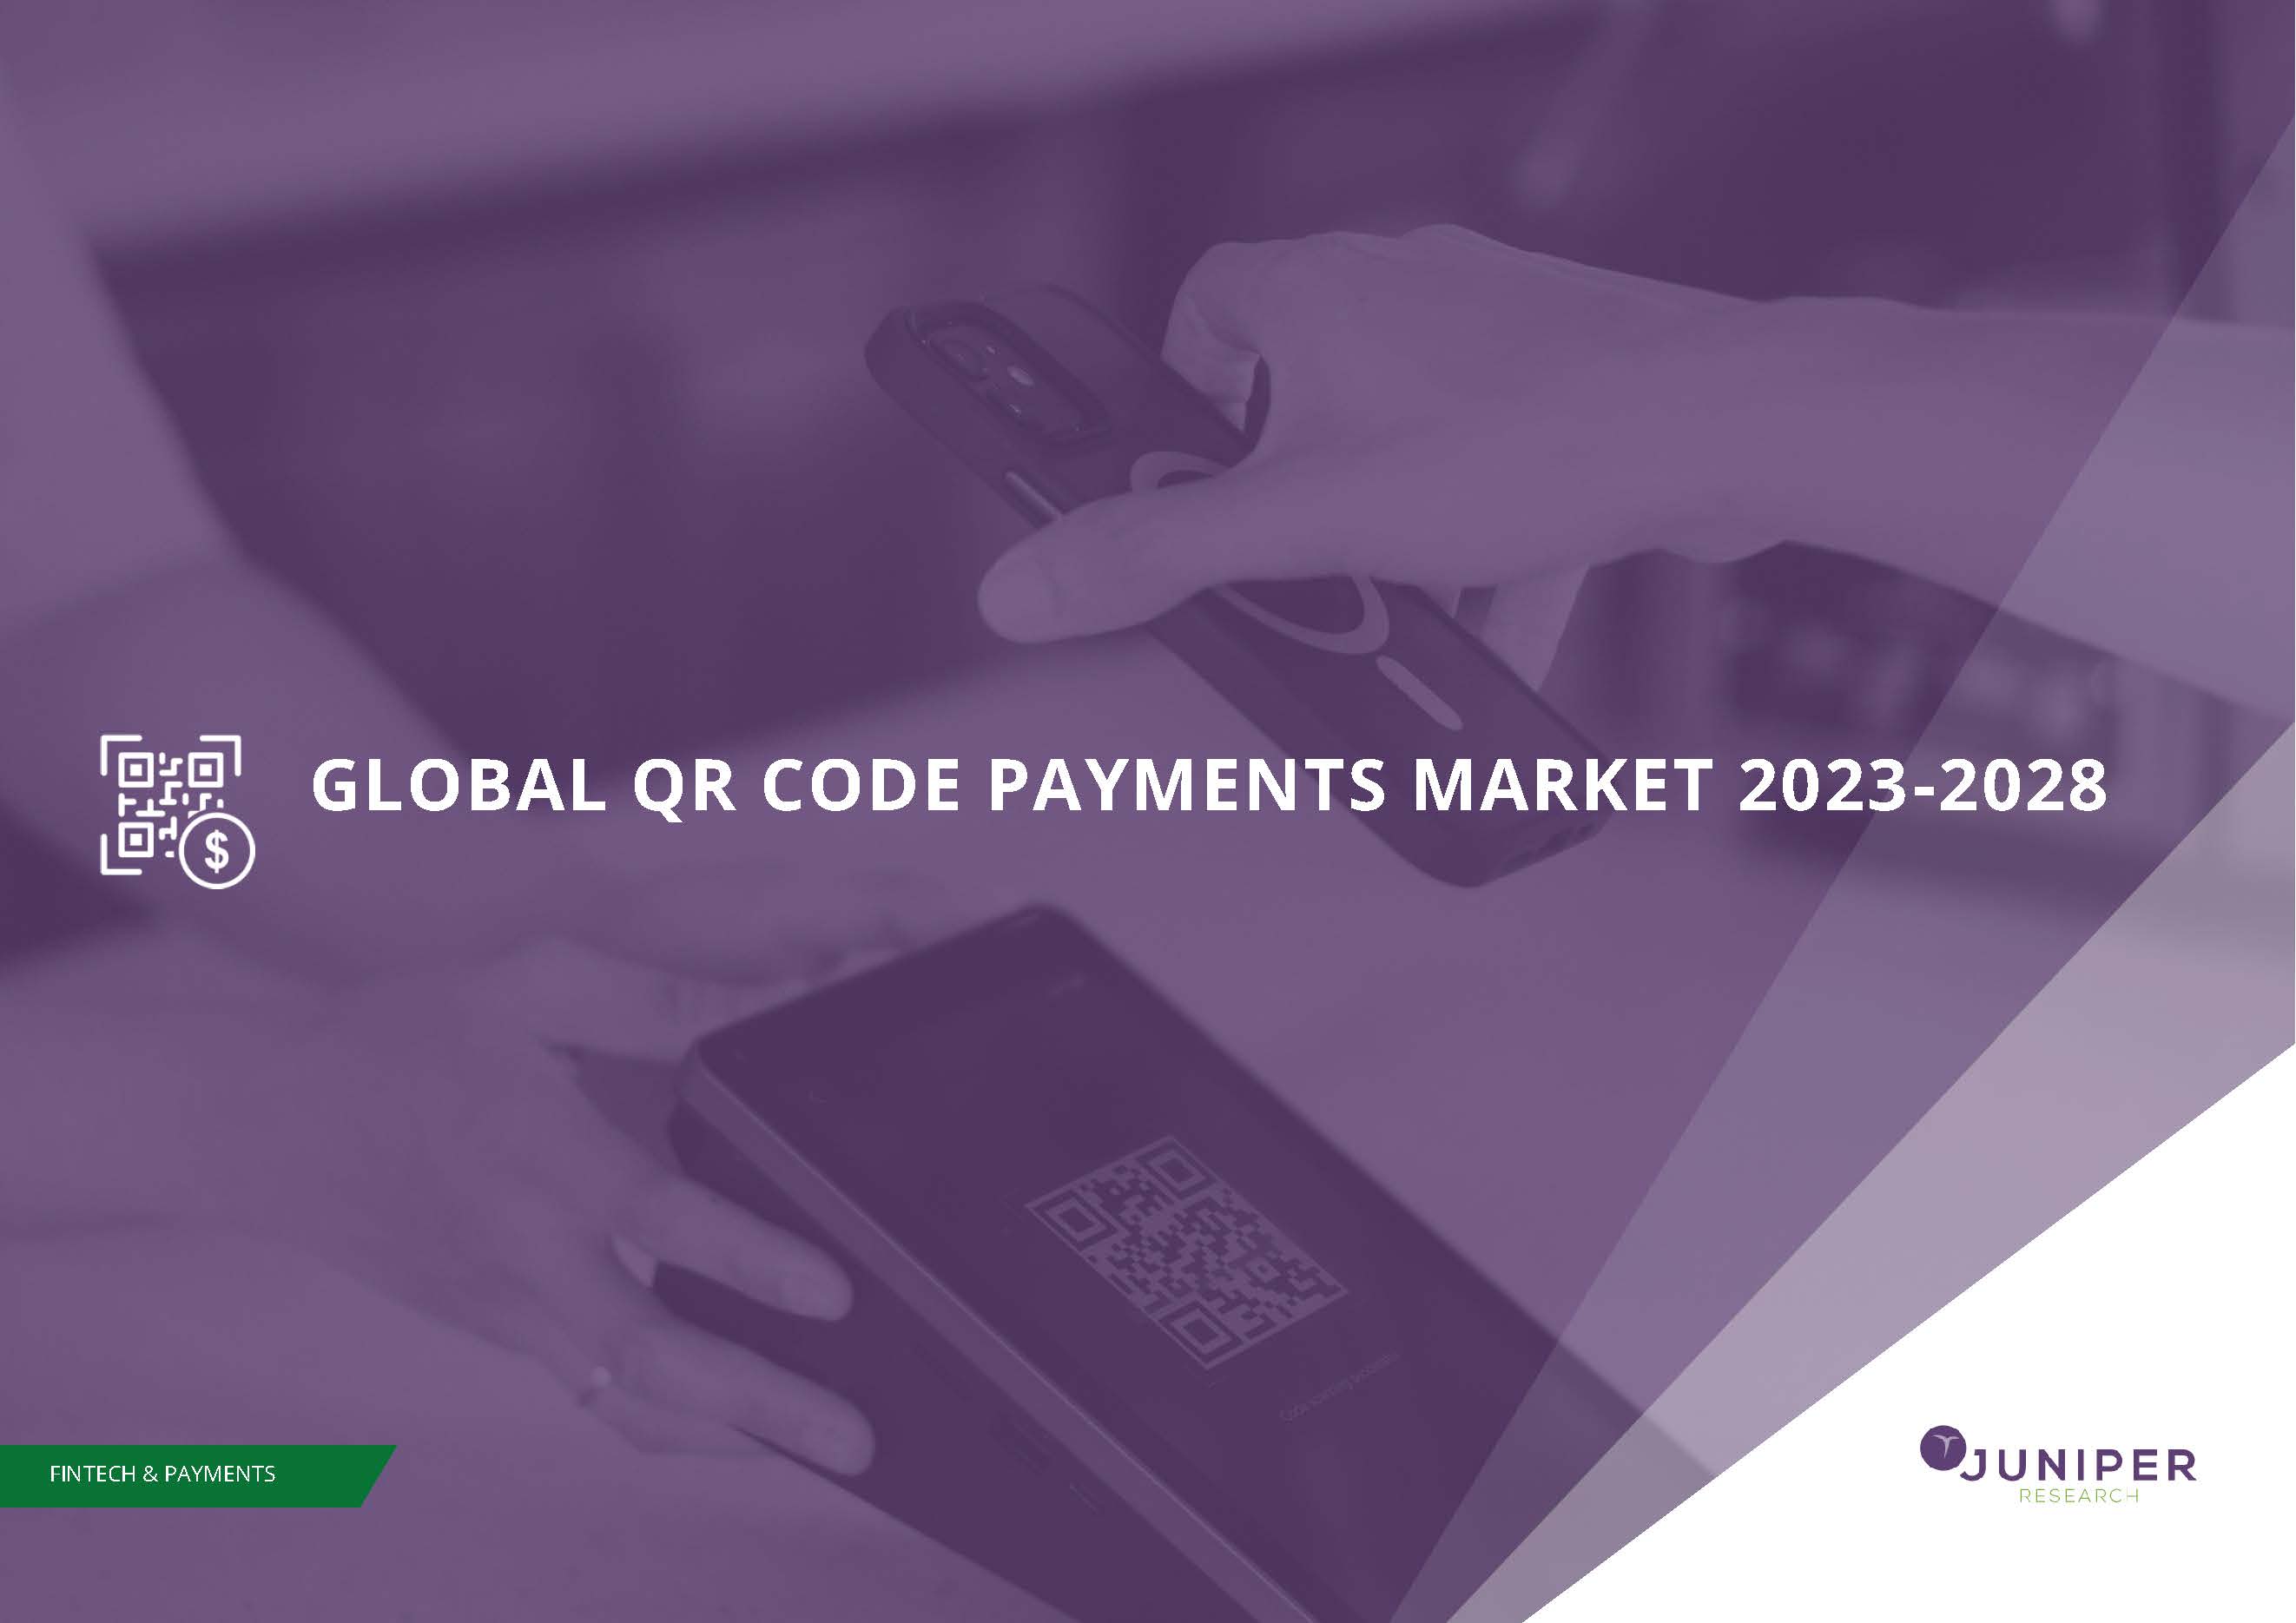 QR Code Payments to Reach $3 Trillion Globally by 2025 | Press